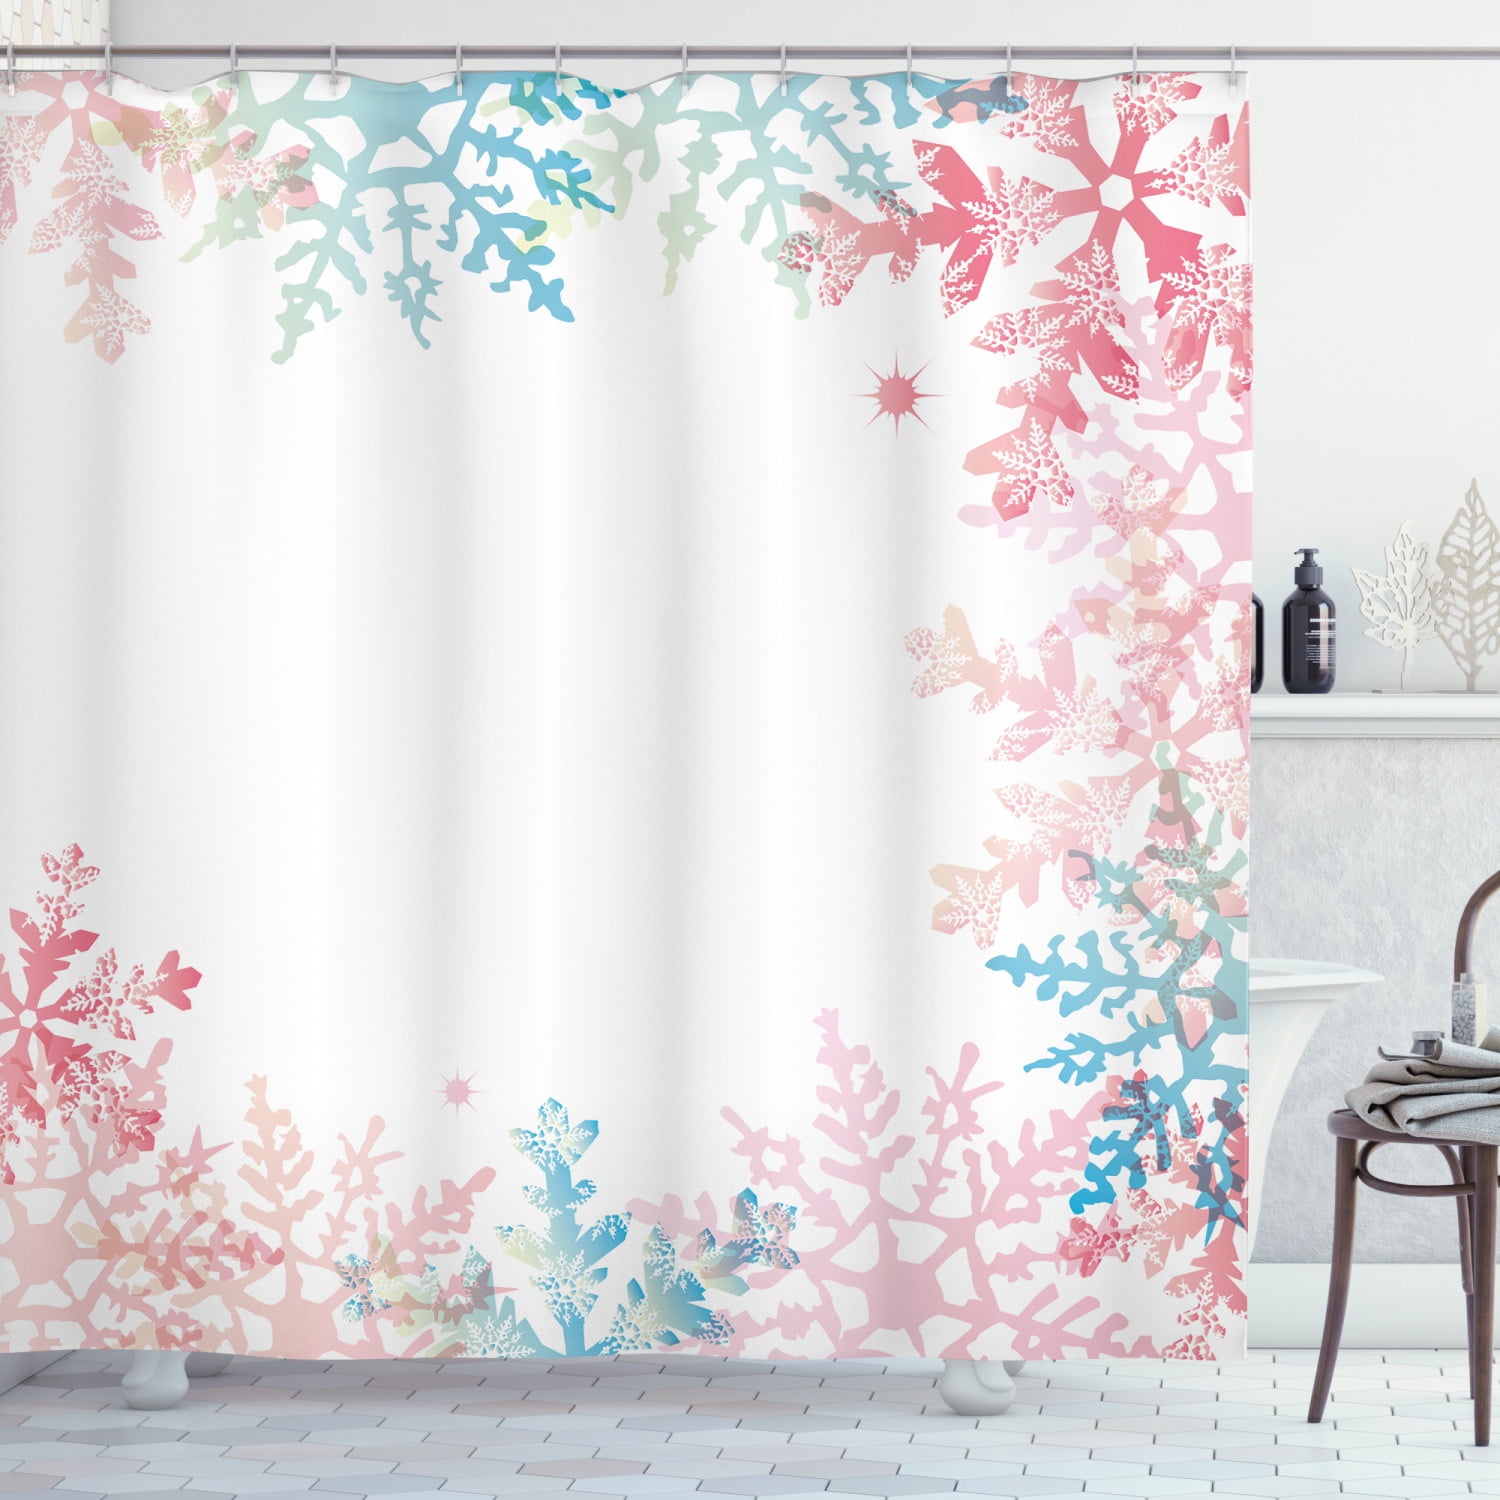 Winter Shower Curtain Abstract, Snowflake Fabric Shower Curtain